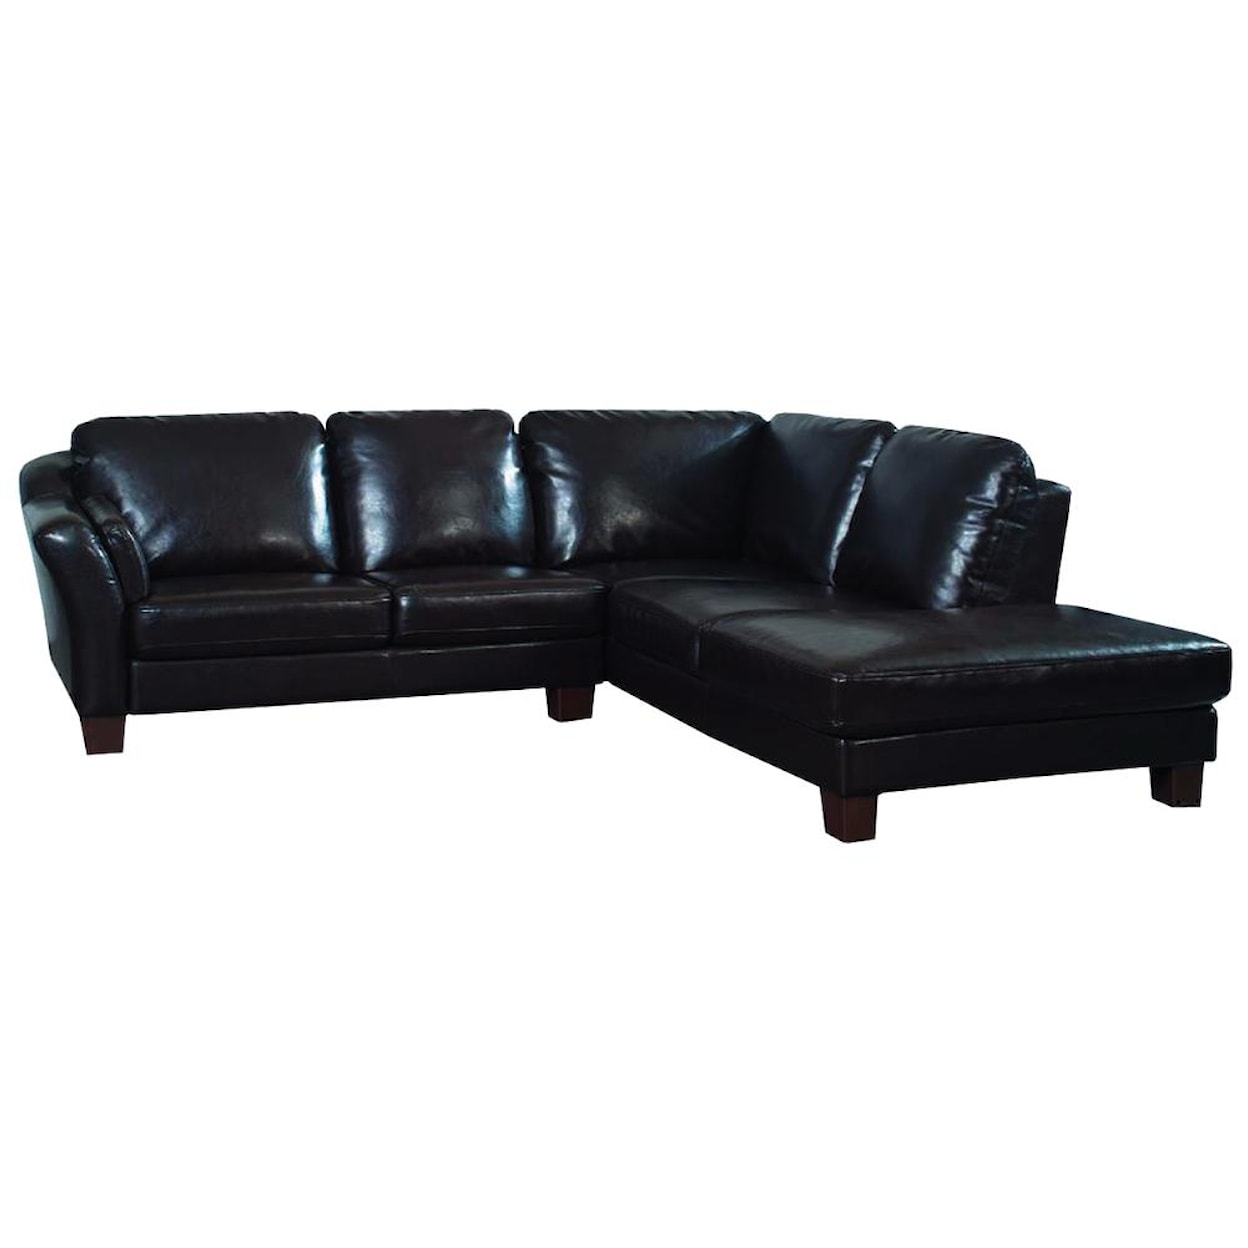 Primo International Holliday L Shaped Leather Sectional